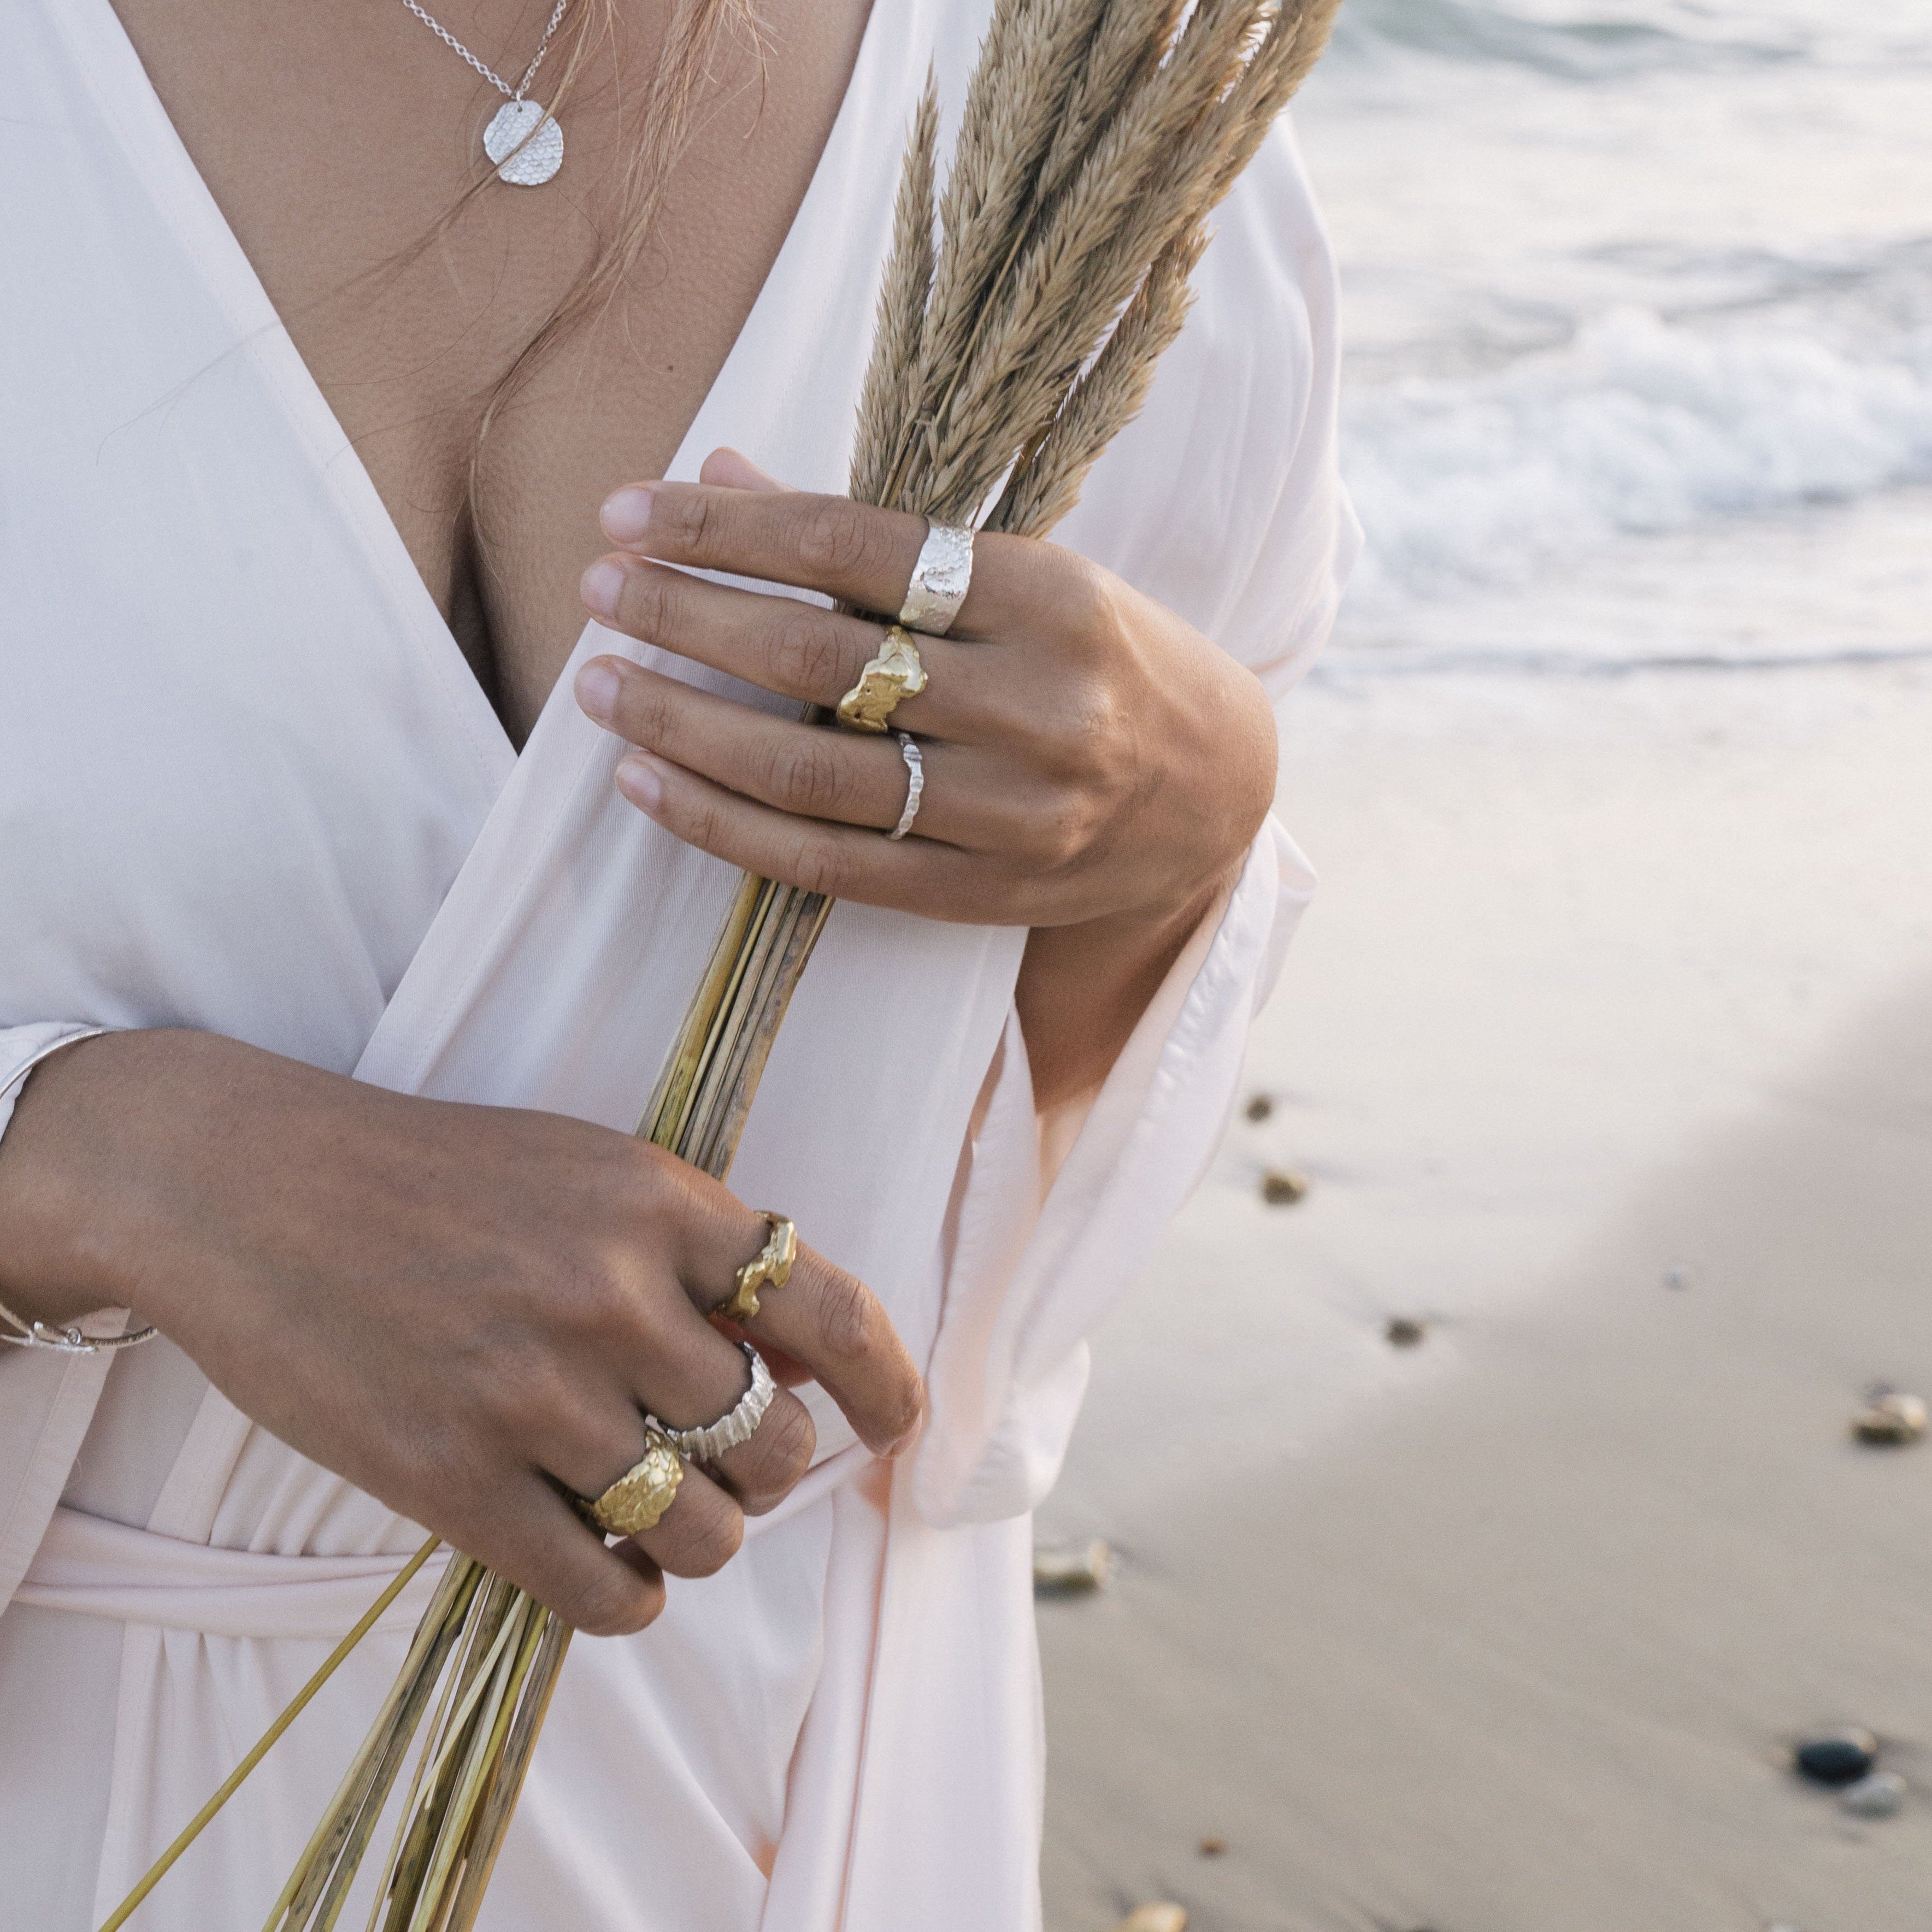 The Molten ring appears to have been moulded from the ocean itself. Inspired by molten lava spilling into cool water to create organic and unique sculptures, reminding us of the power of mother nature. Enjoy this treasure wrapped around your finger everyday and feel a little closer to the ocean.